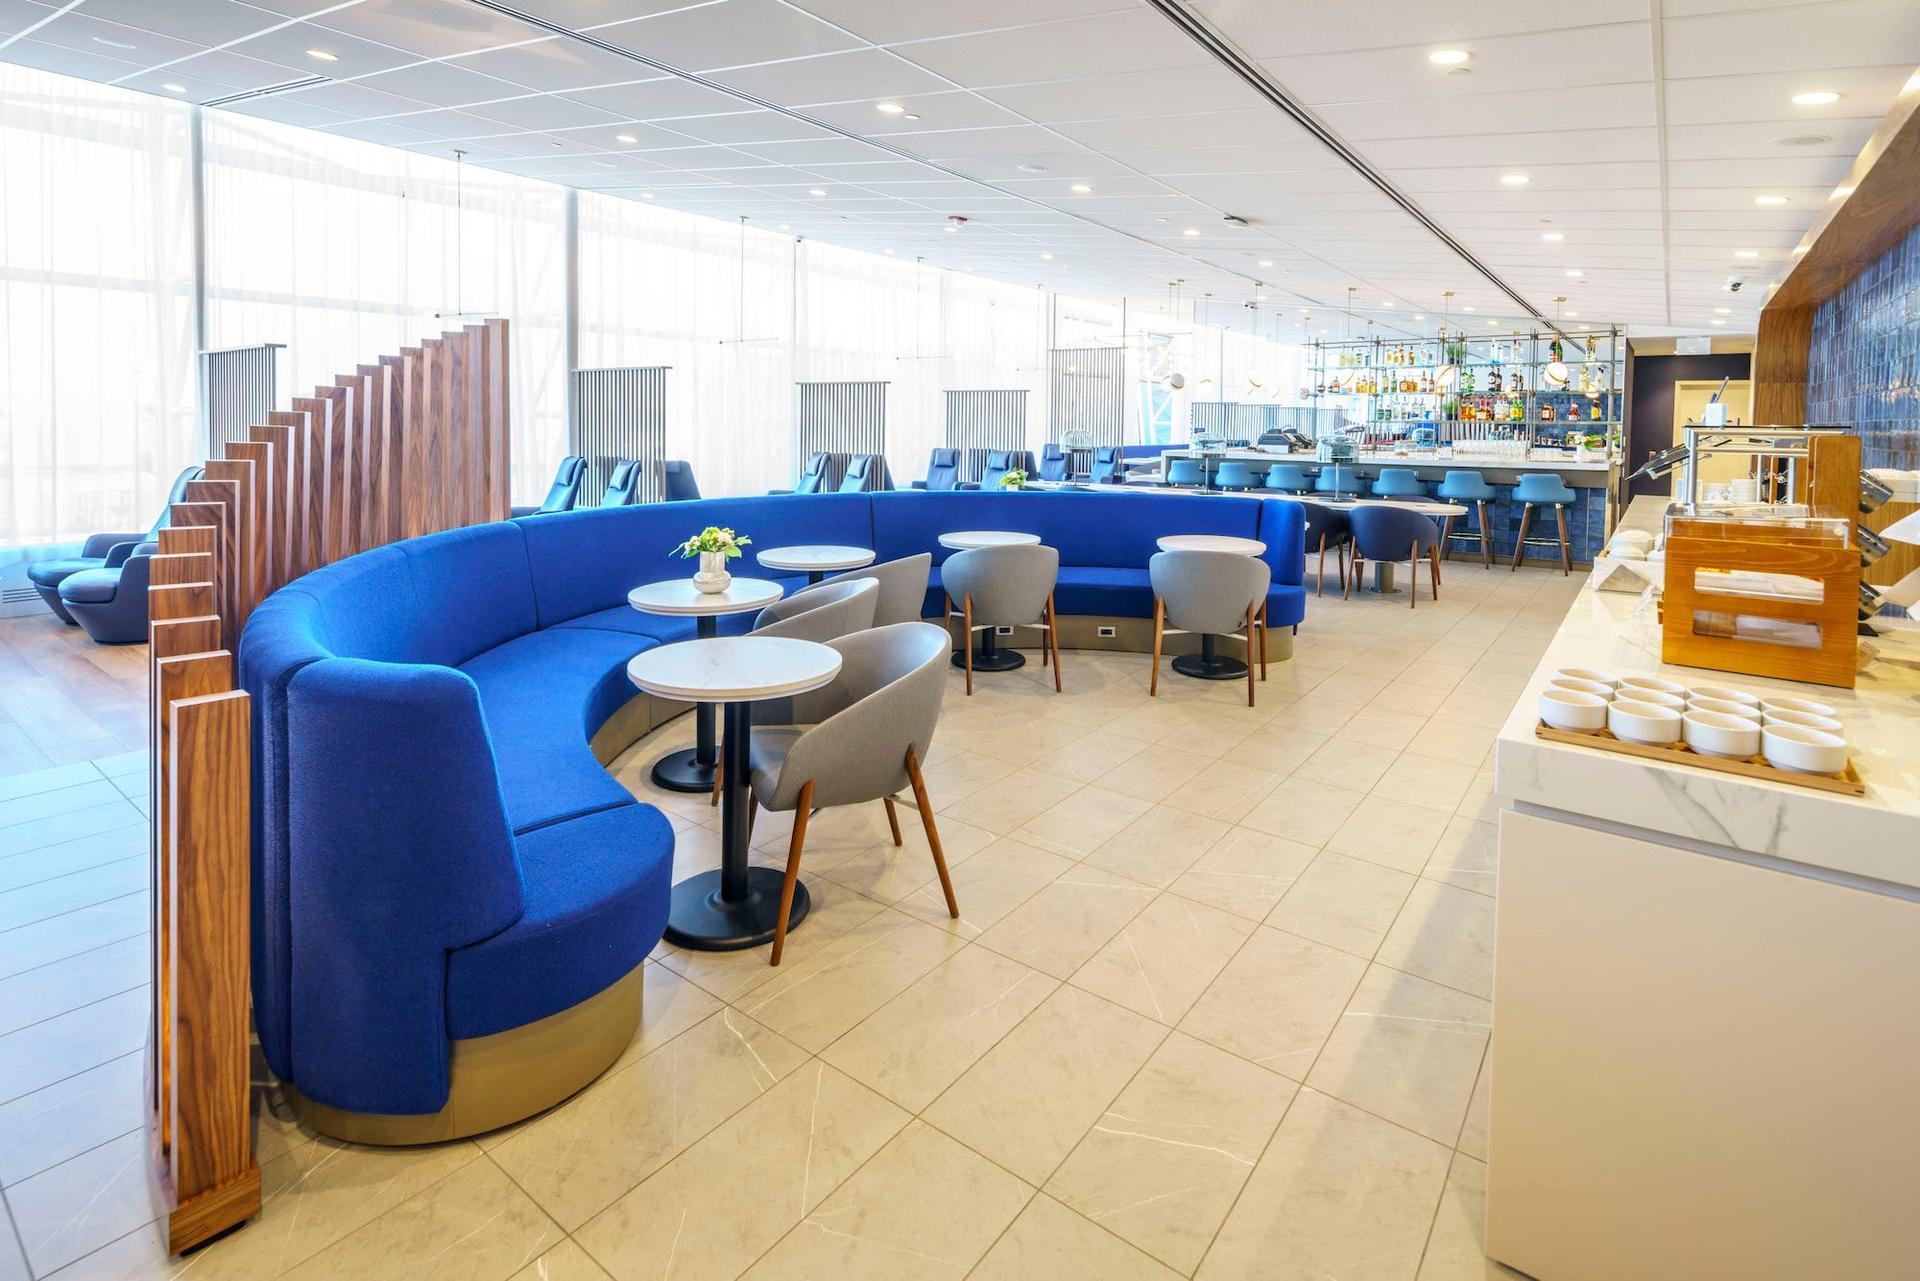 Air France/KLM Lounge operated by Plaza Premium Group image 8 of 10